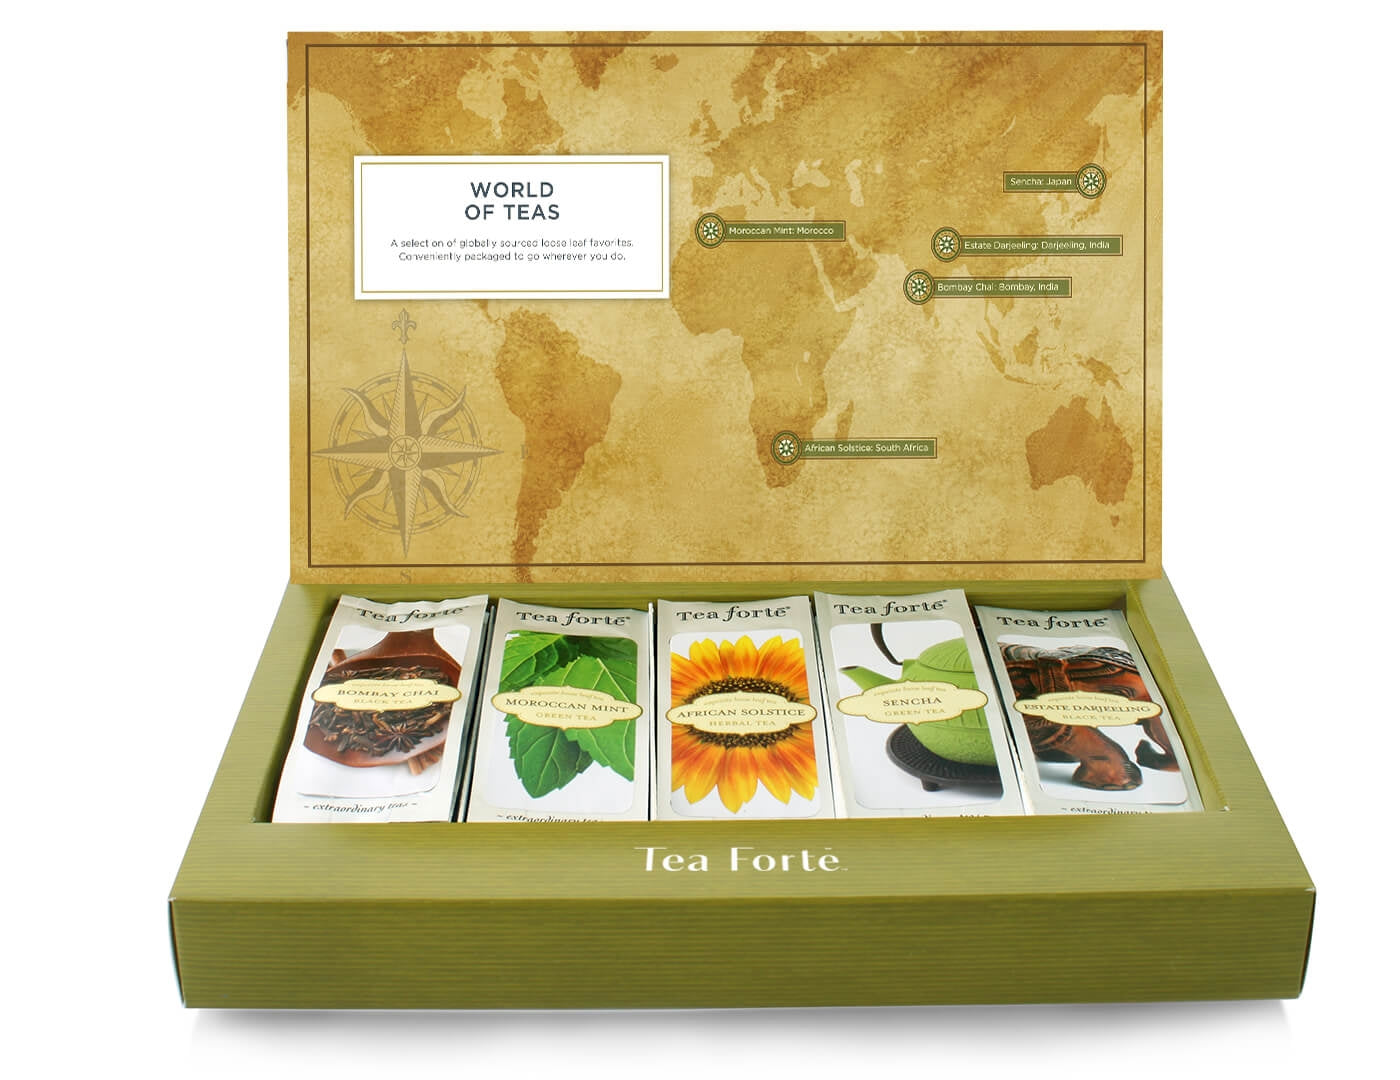 World of Teas tea assortment 15 count box of Single Steeps pouches with lid open